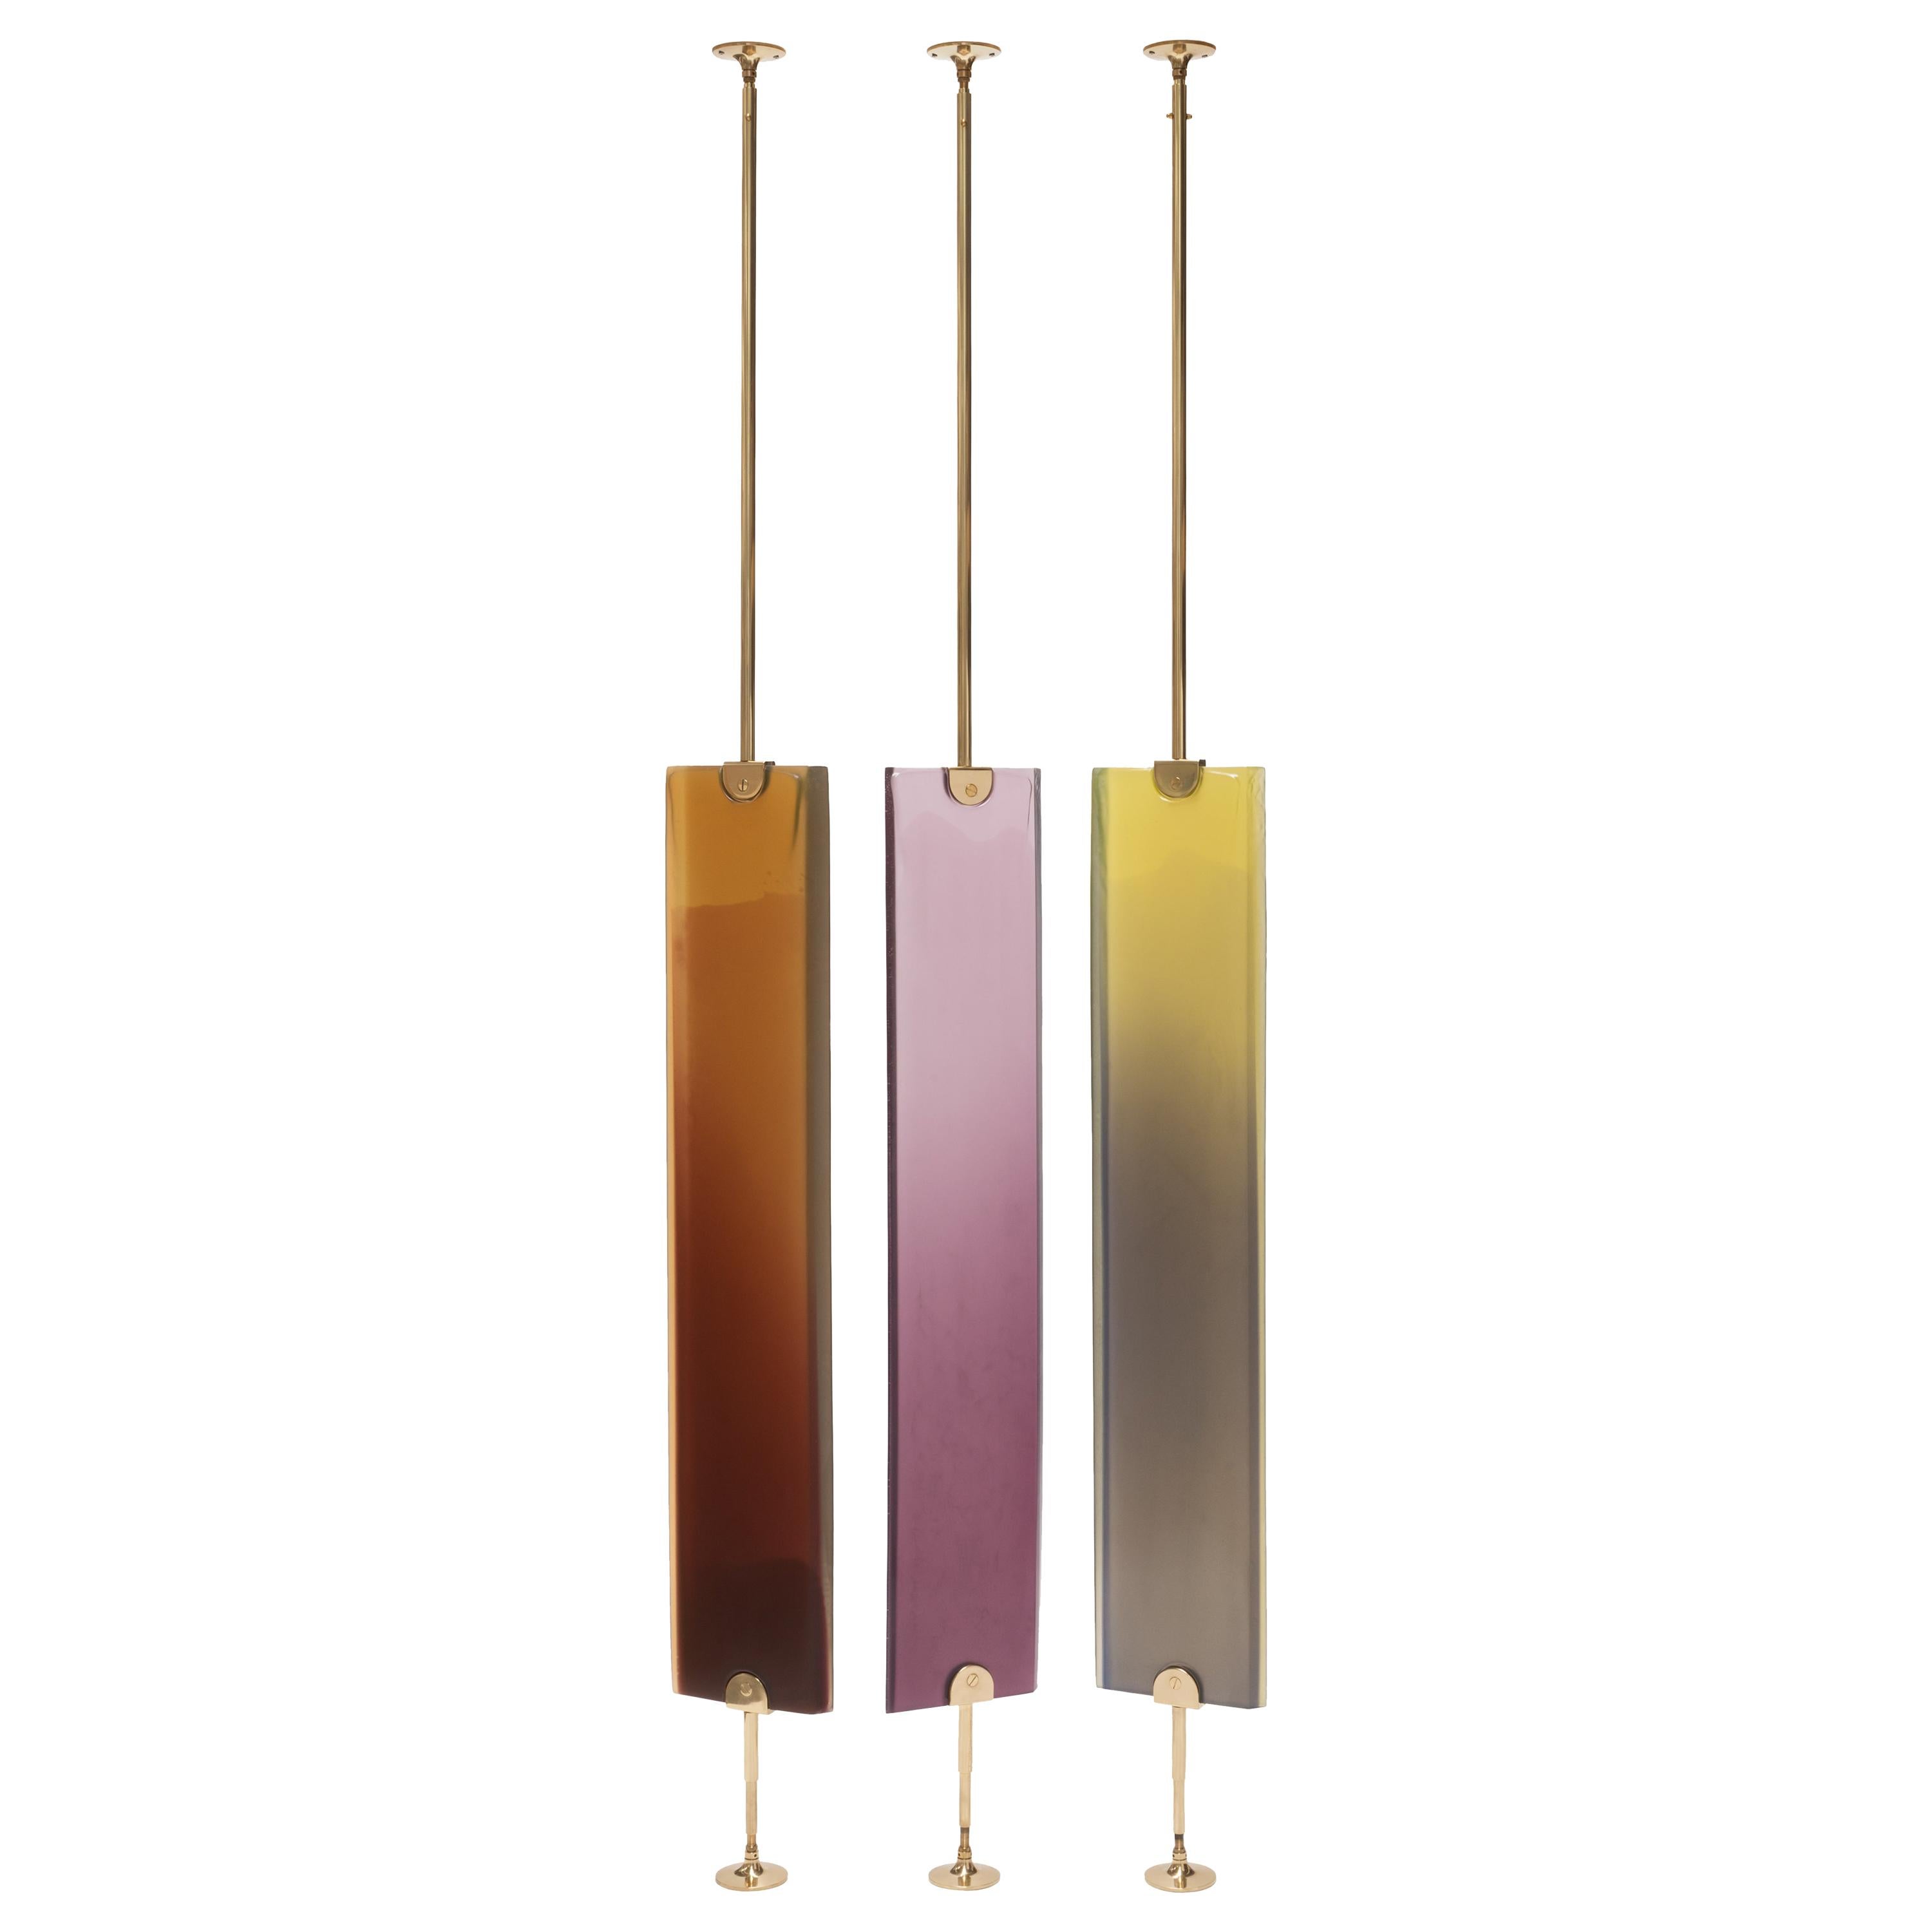 Transparency Matters collection by Draga & Aurel:

Partition screen made from cast resin and self-standing structure in polished brass. Transparency of the resin creates light effects and color nuances.
Handcrafted in our Atelier in Como. Each piece